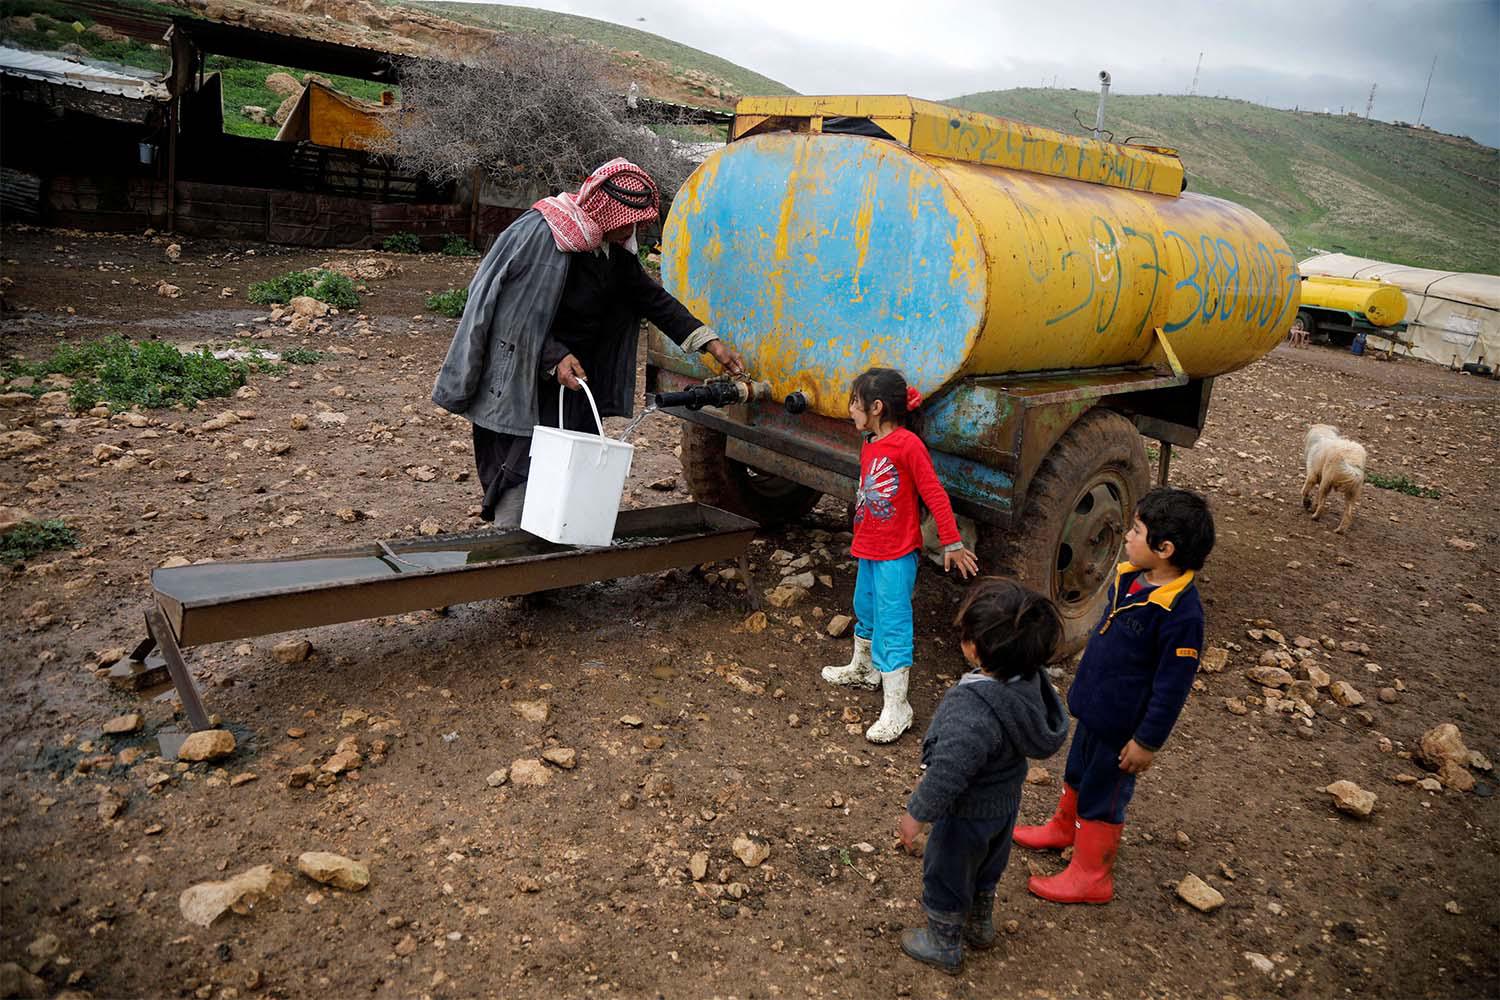 A Palestinian man fills a container with water from a tank in the Bedouin village of Al-Maleh in Jordan valley in the Israeli-occupied West Bank